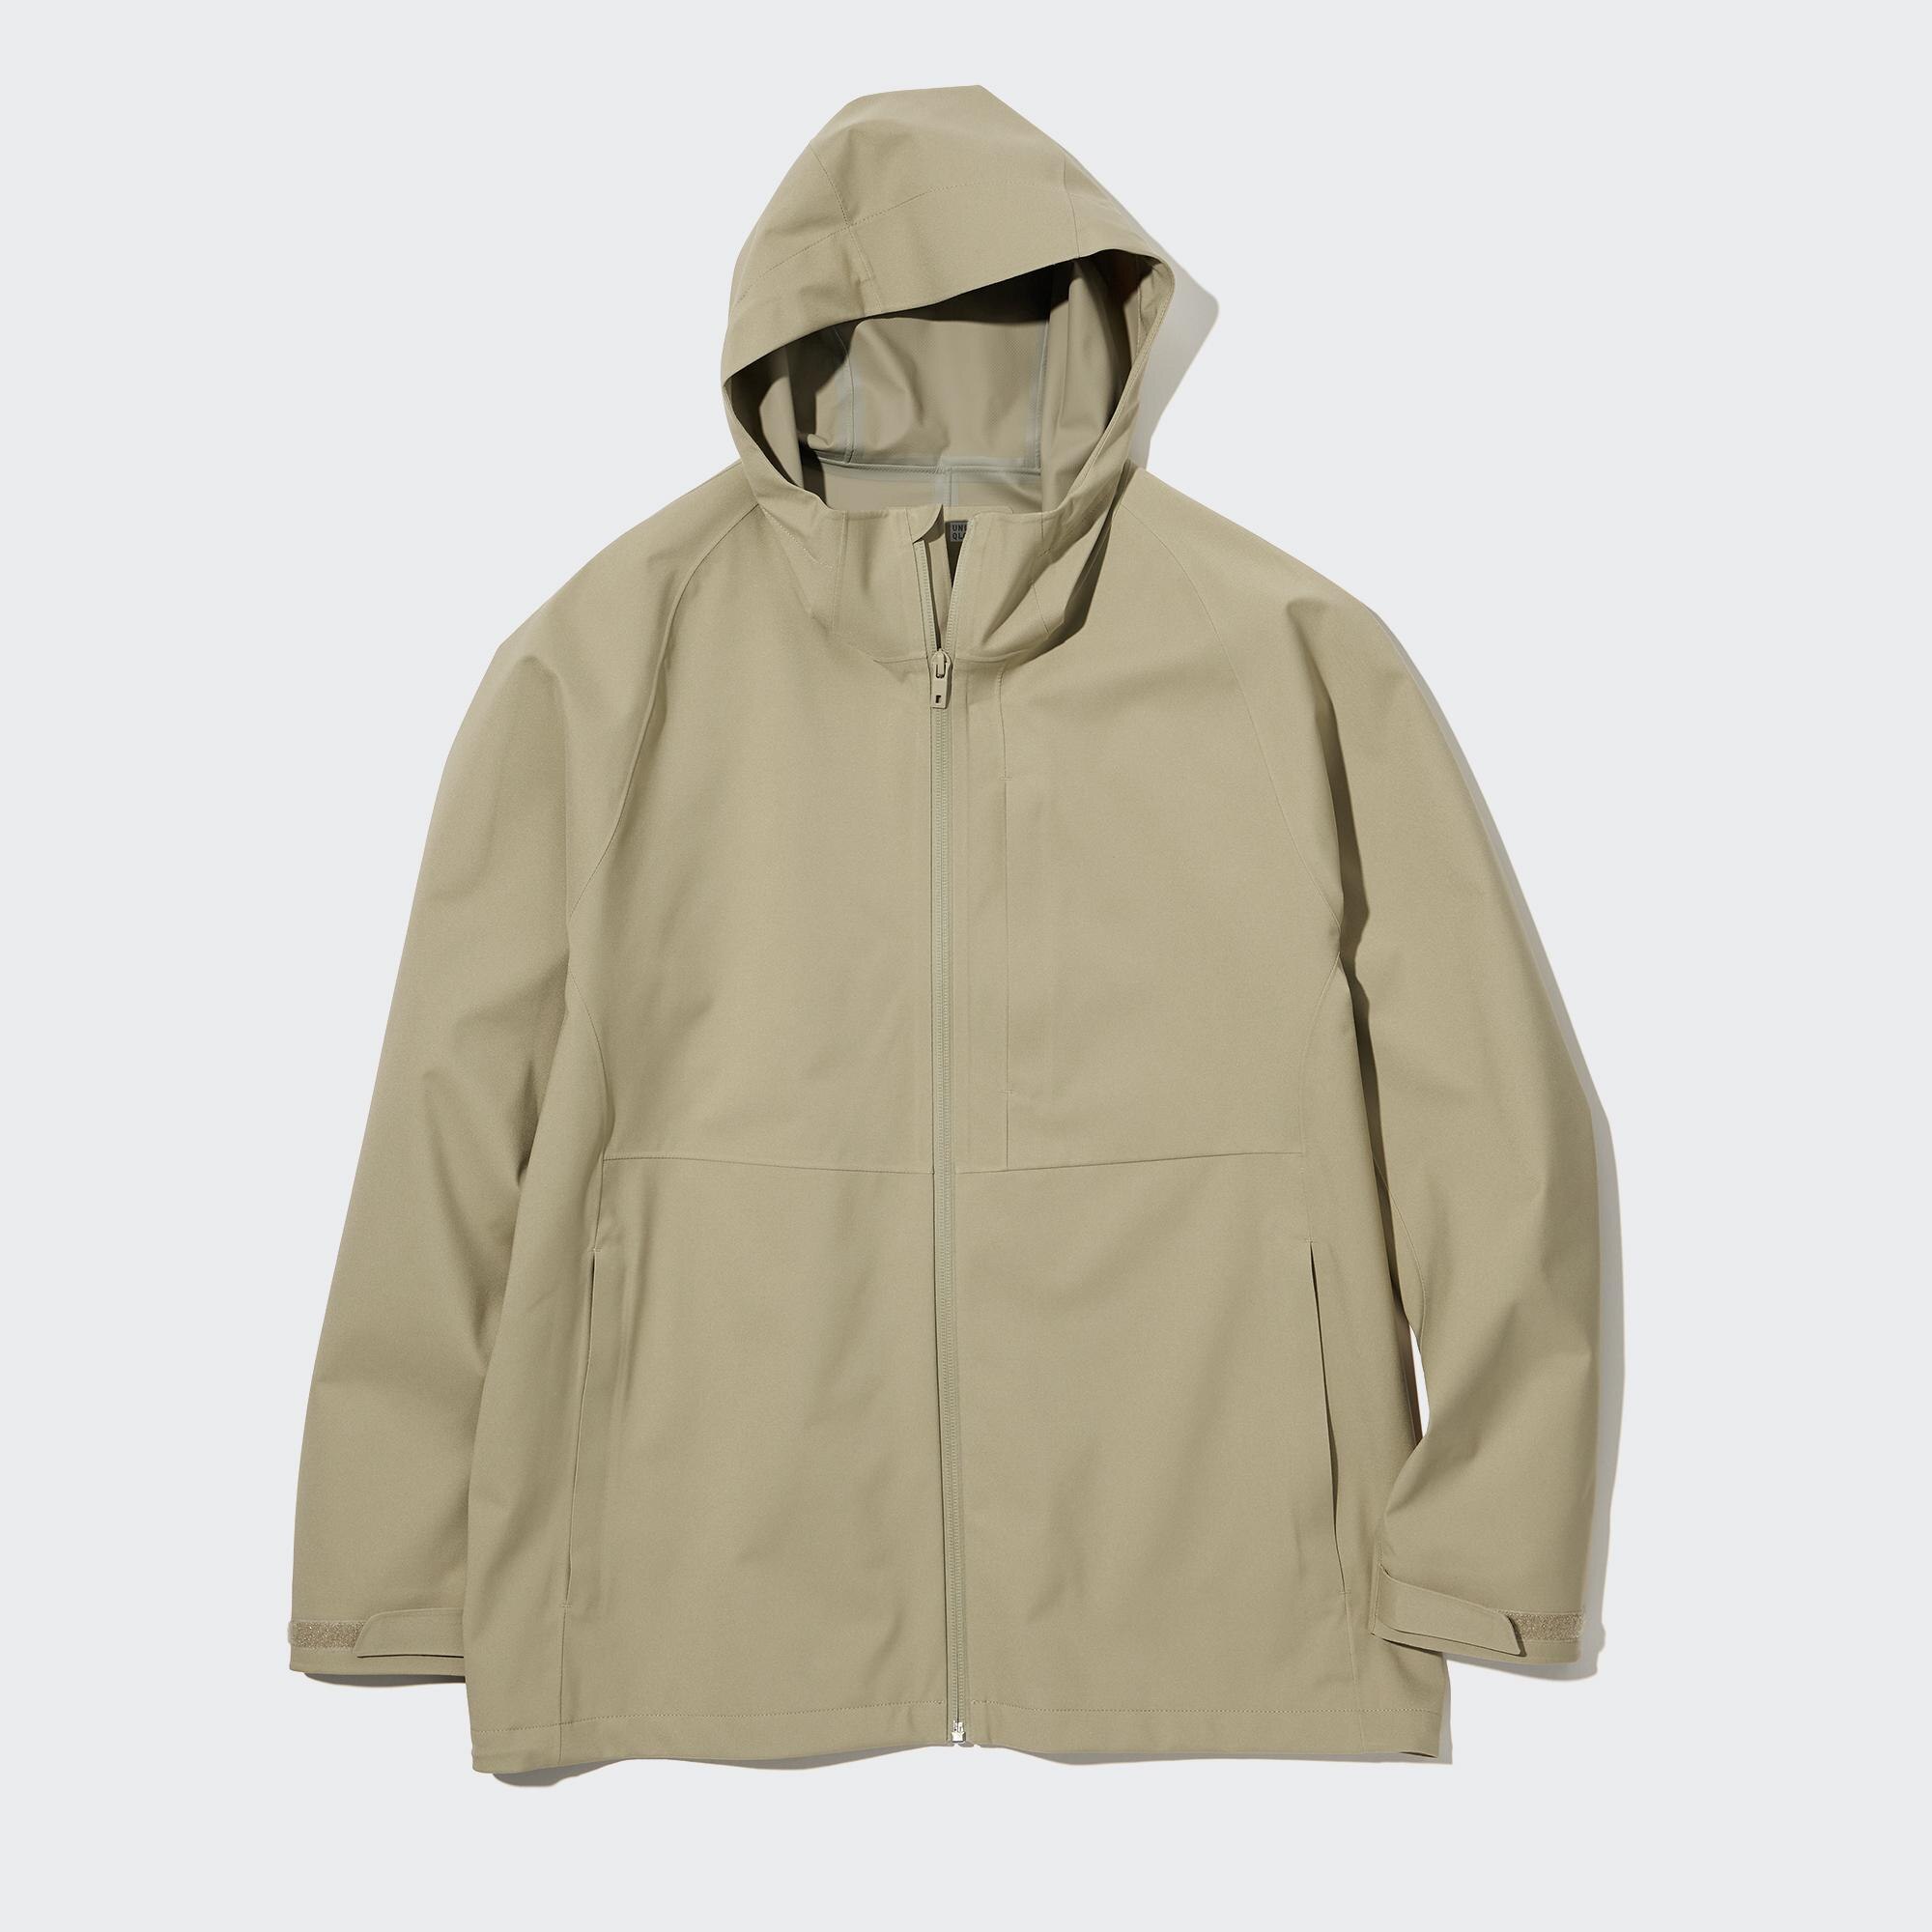 Uniqlo Blocktech Parka 4 Year Review yikes  YouTube